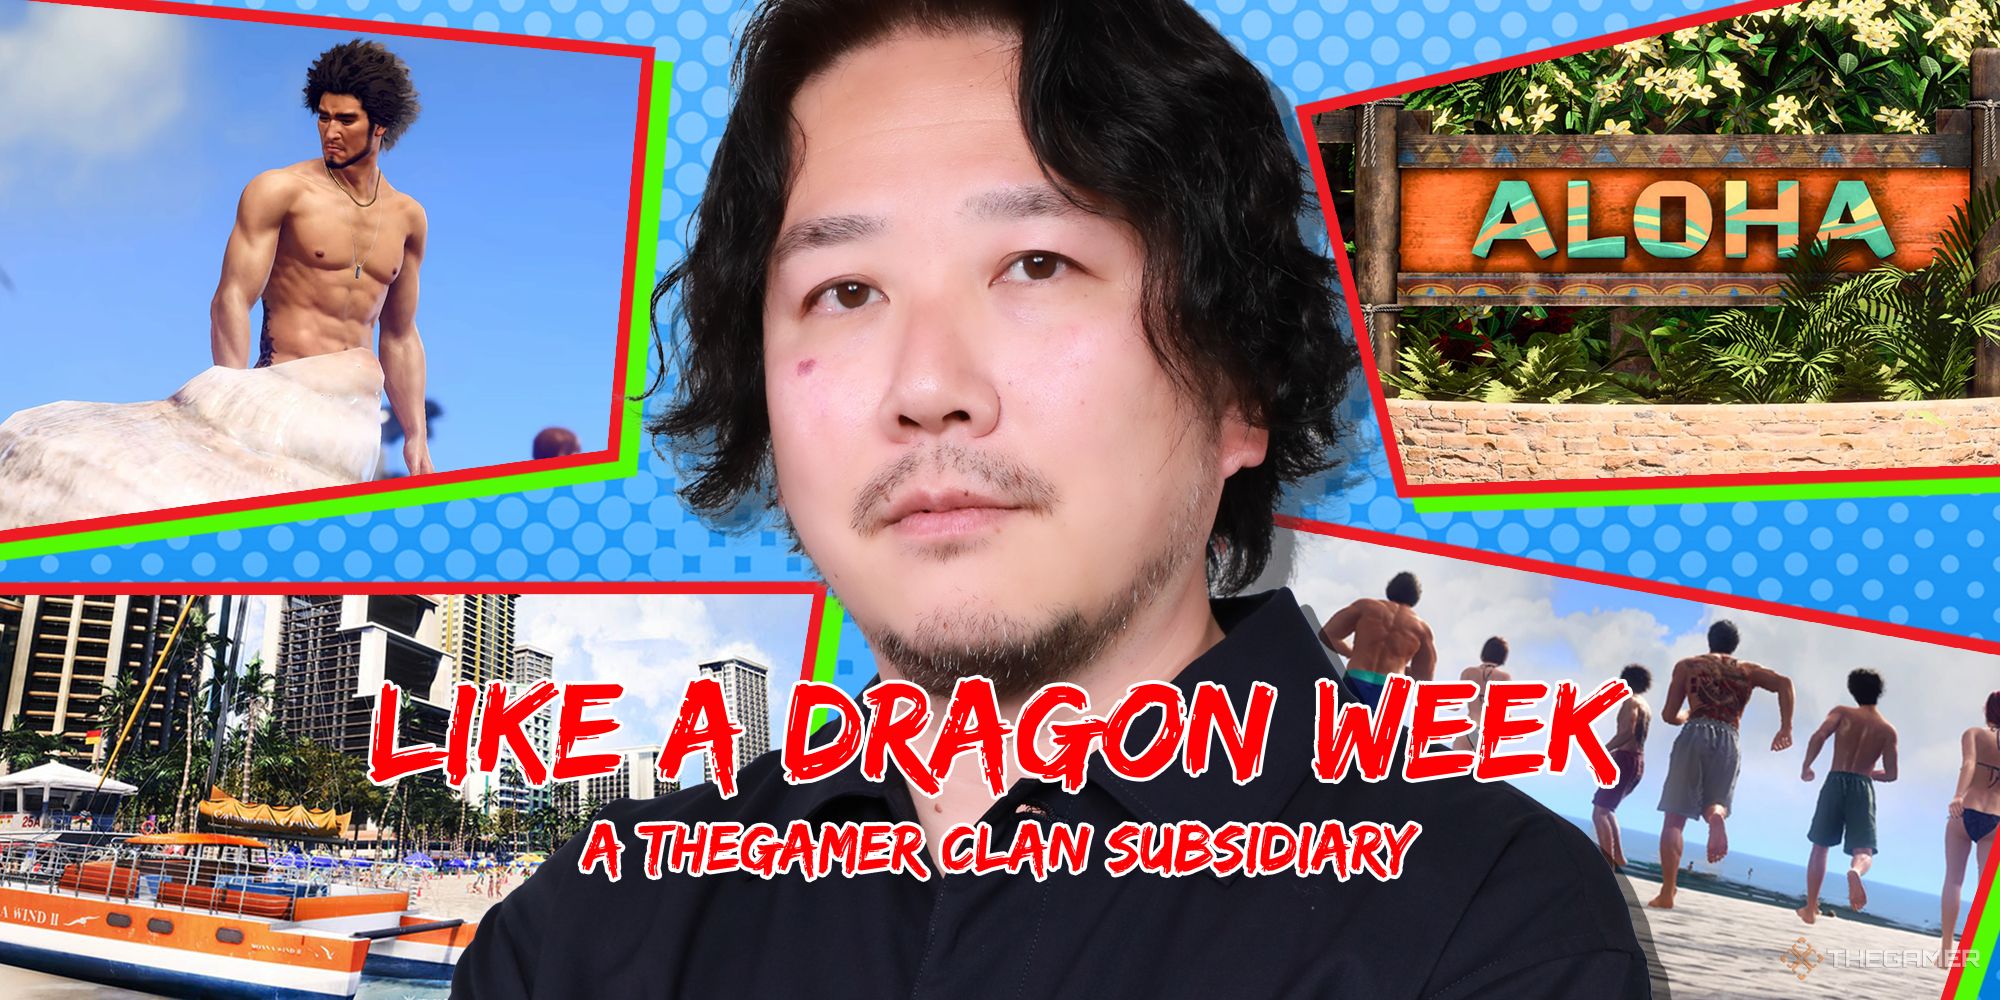 RGG Studio Chief Producer Hiroyuki Sakamoto with a collage of Like a Dragon Infinite Wealth images and the Like a Dragon Week text overlaid on top.